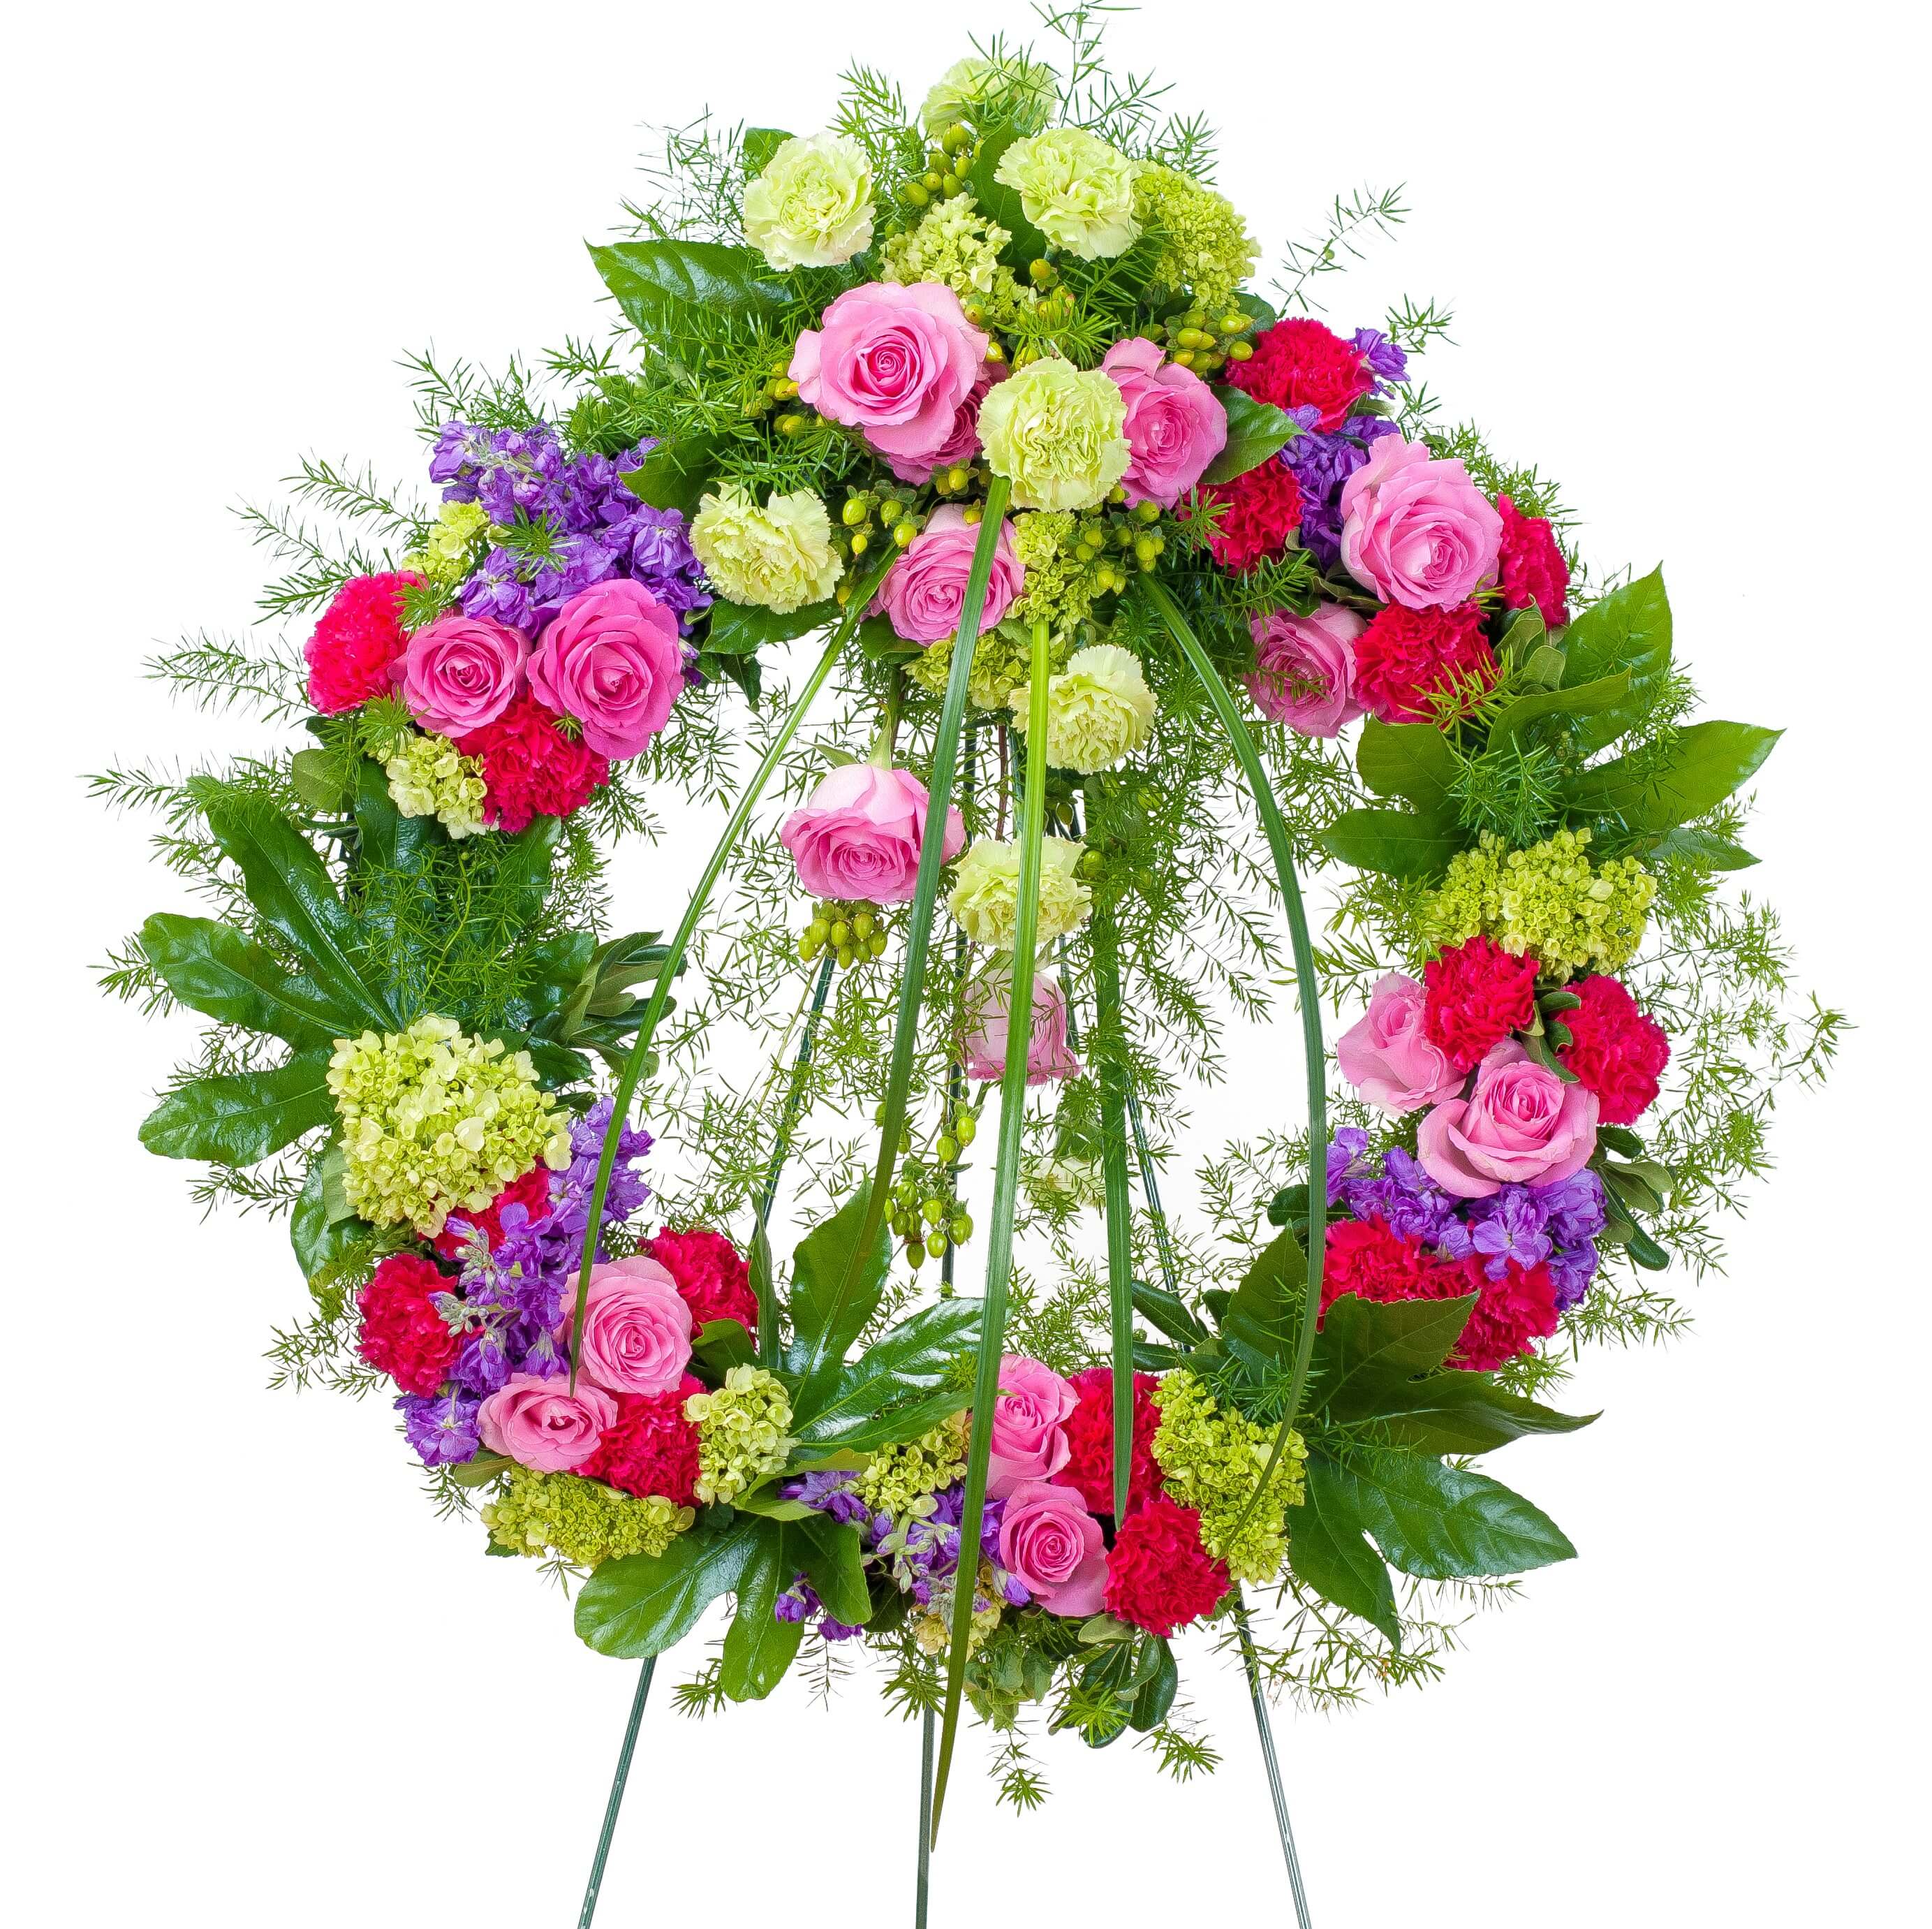 Forever Cherished Wreath - This beautiful wreath with a combination of pink and purple flowers will show that      they will be forever cherished.